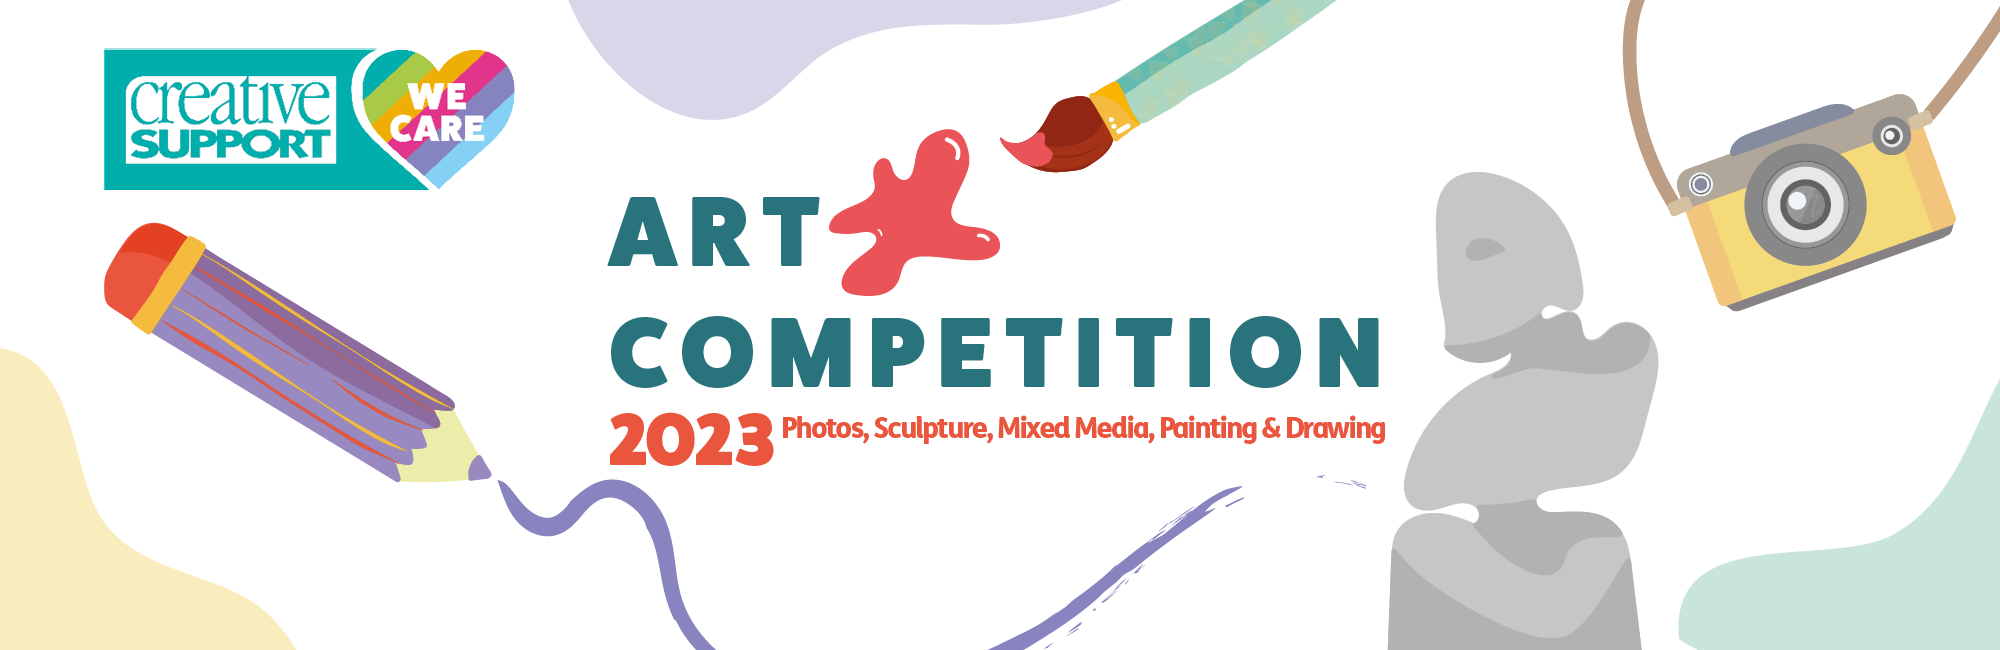 2023 Art Competition Now Open! Creative Support